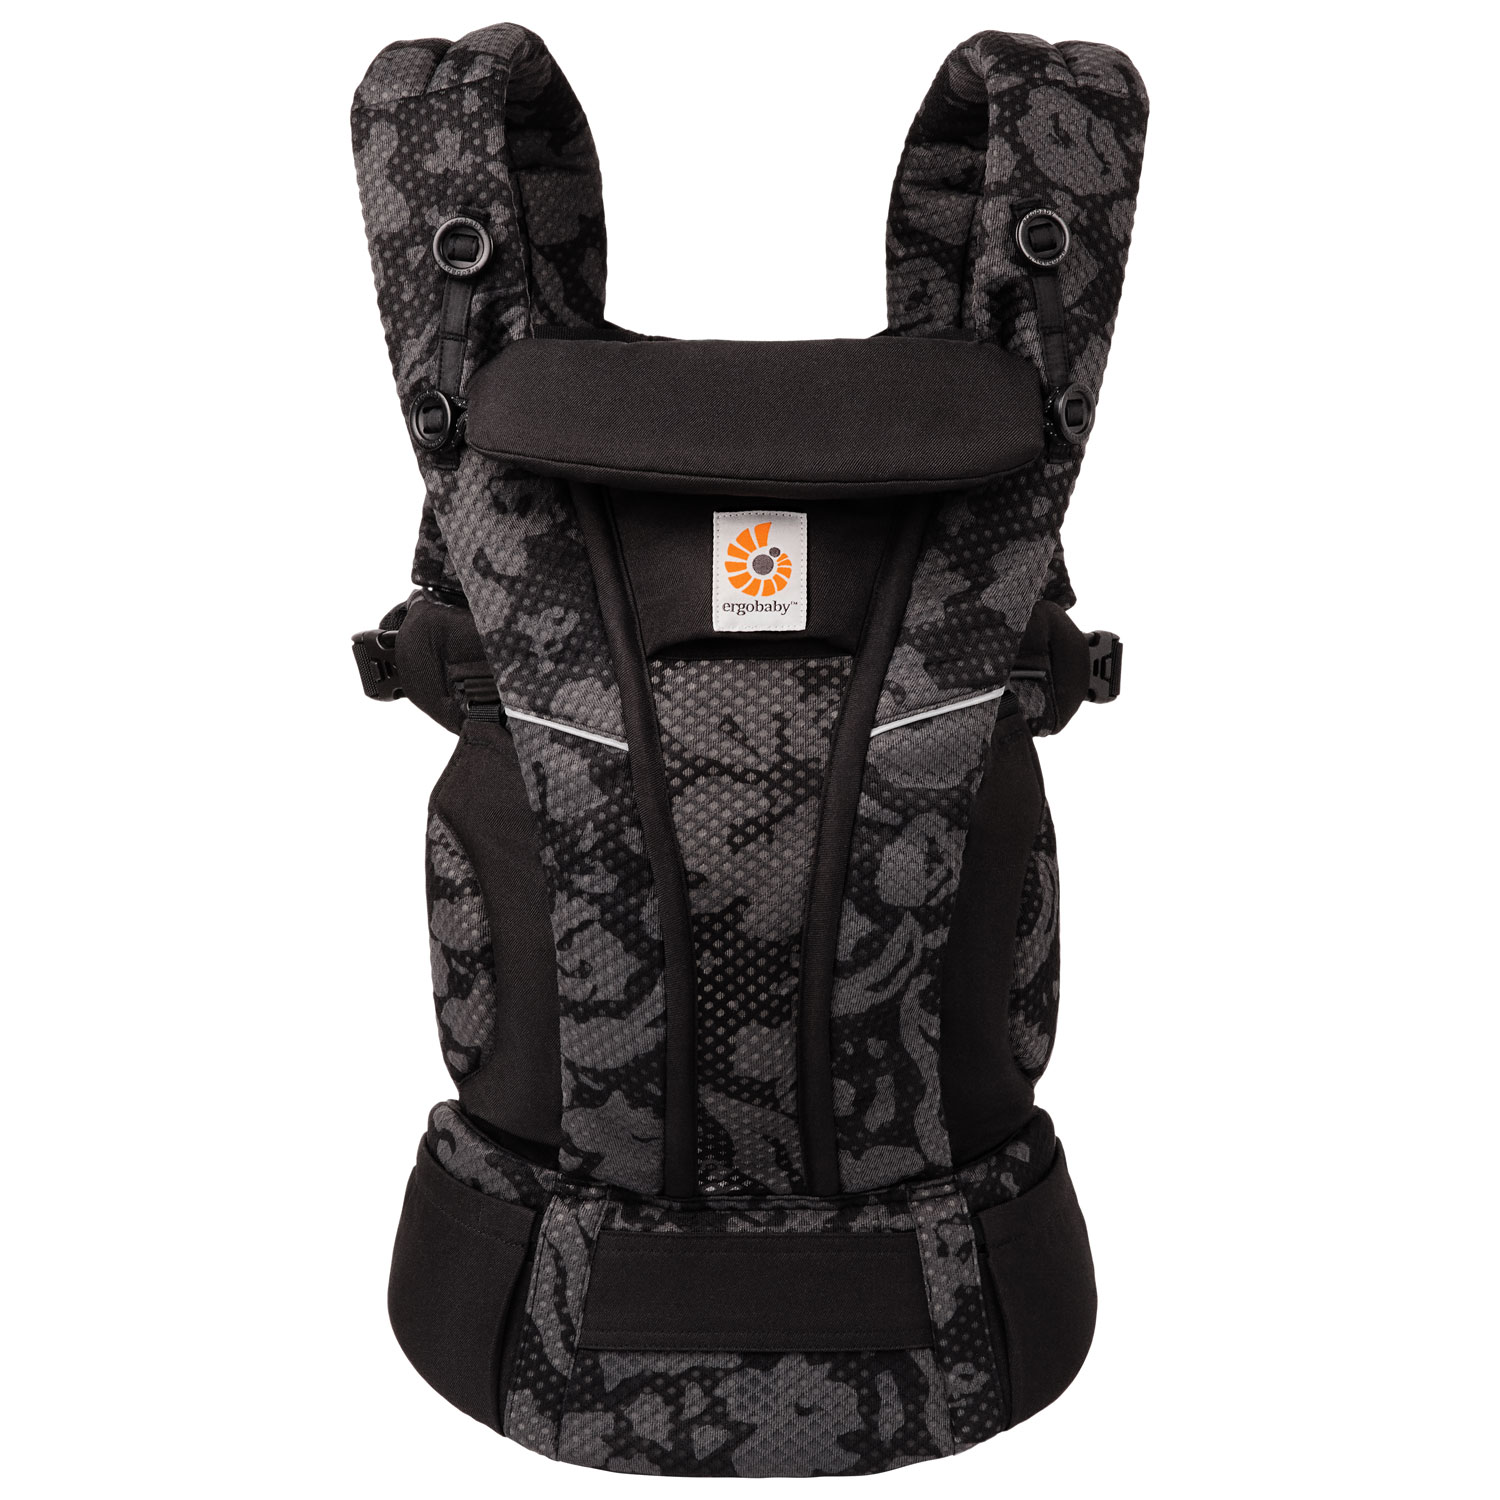 Ergobaby Omni Breeze Four Position Baby Carrier - Onyx Blooms